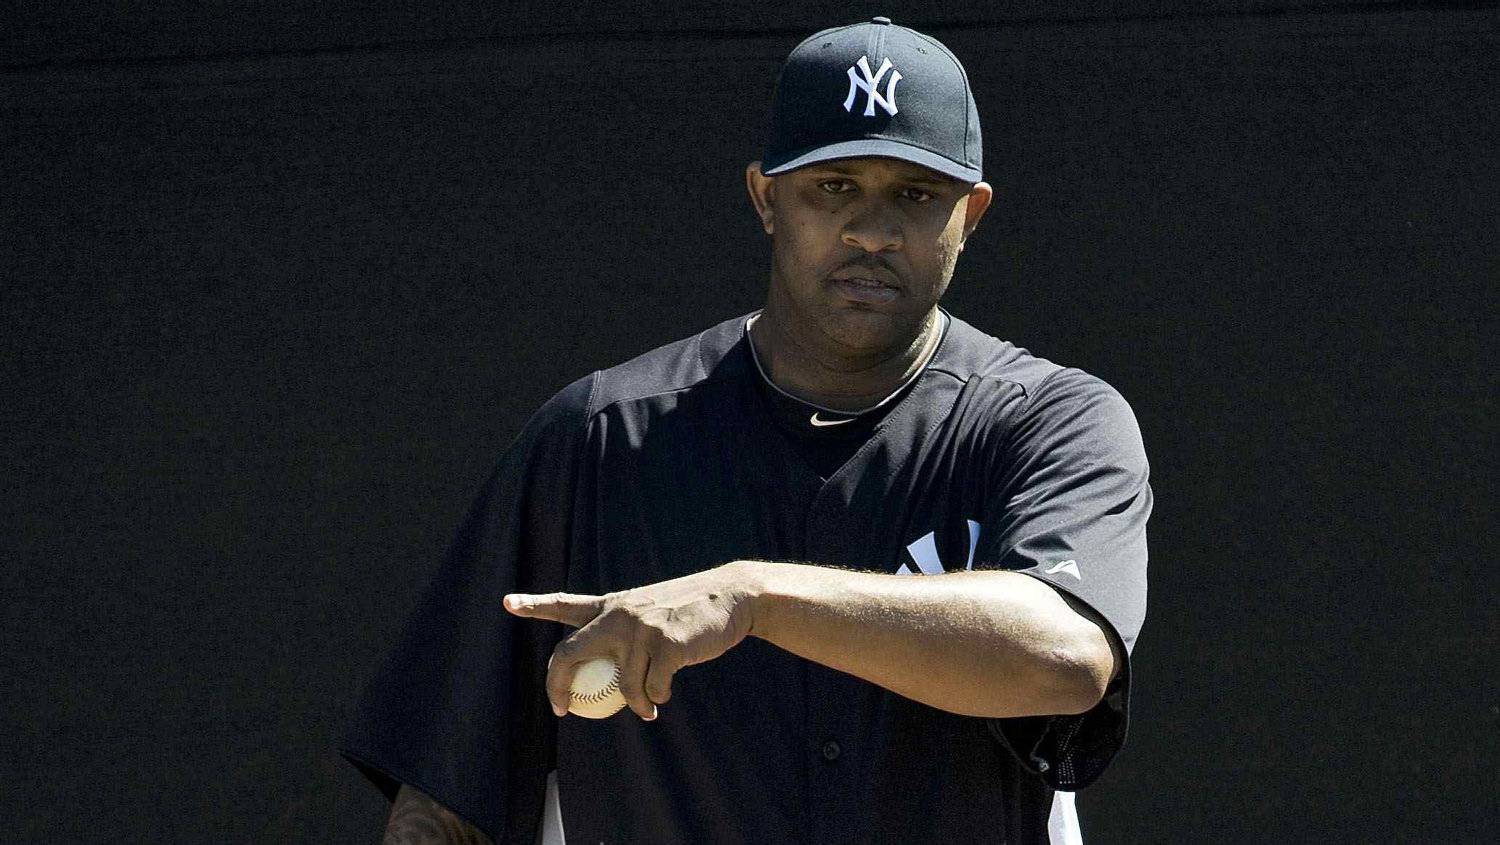 Yankees pitcher reveals his weight-loss secret - The Globe and Mail